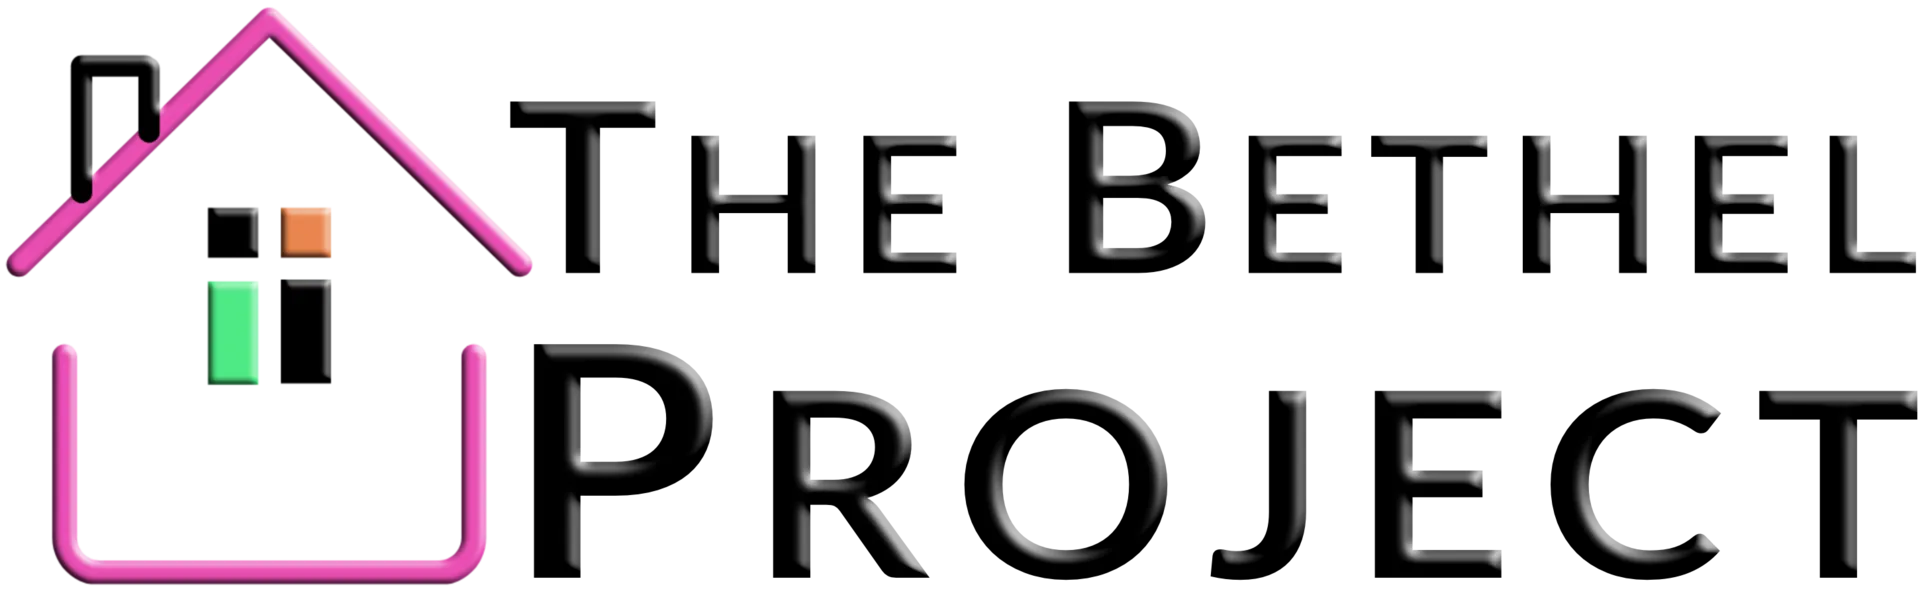 THE BETHEL PROJECT